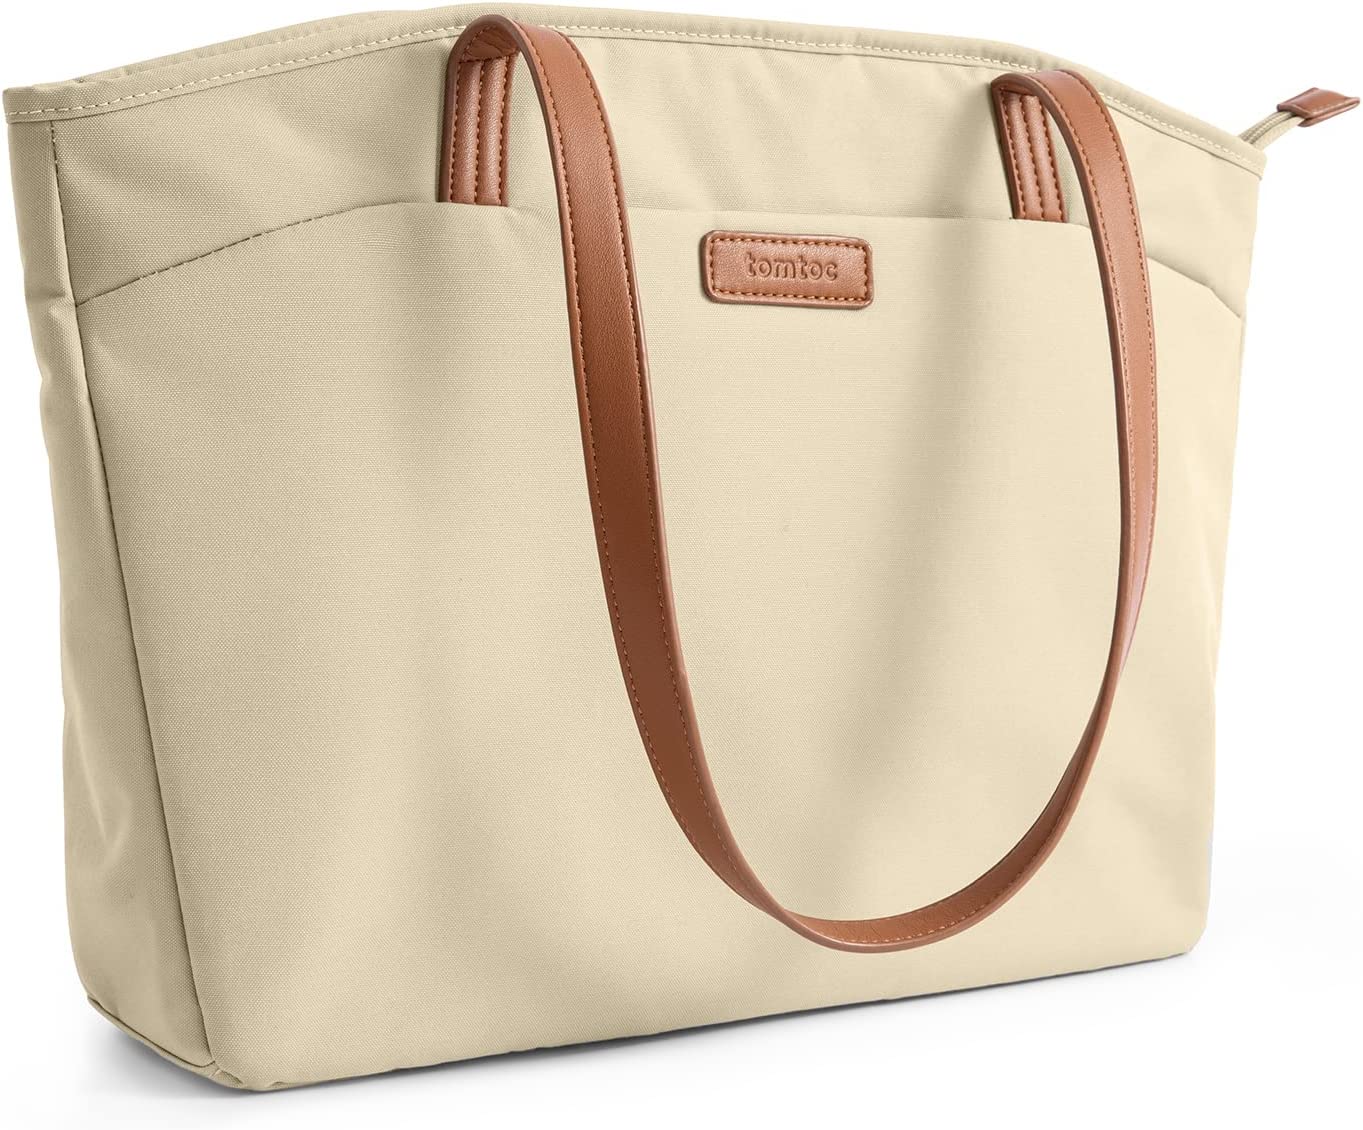 Tomtoc TheHer-A53 Laptop Tote Bag 16 inch - Khaki